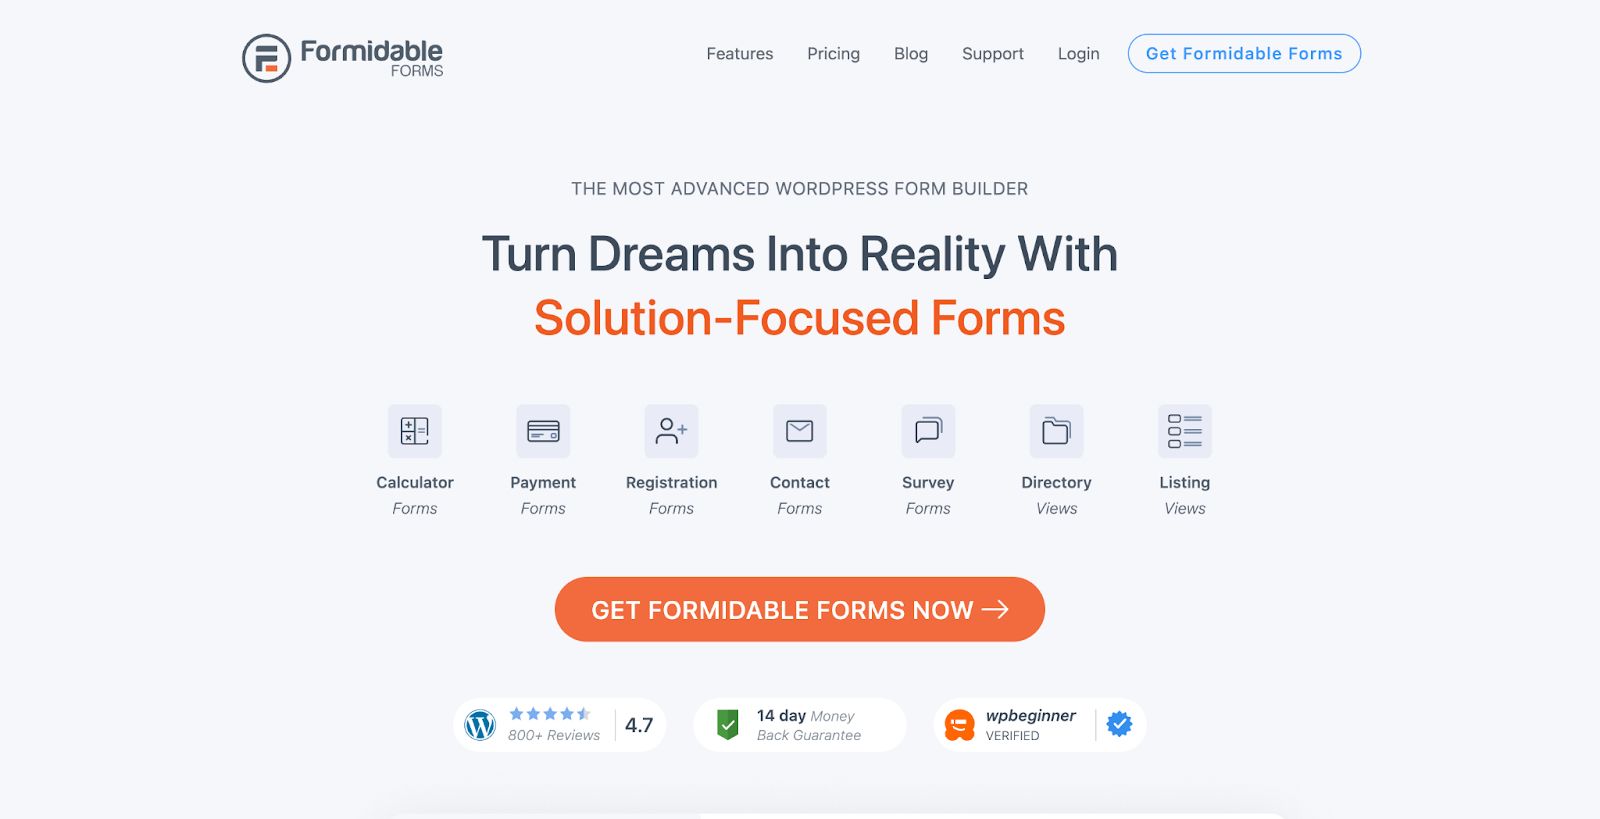 Formidable Forms homepage